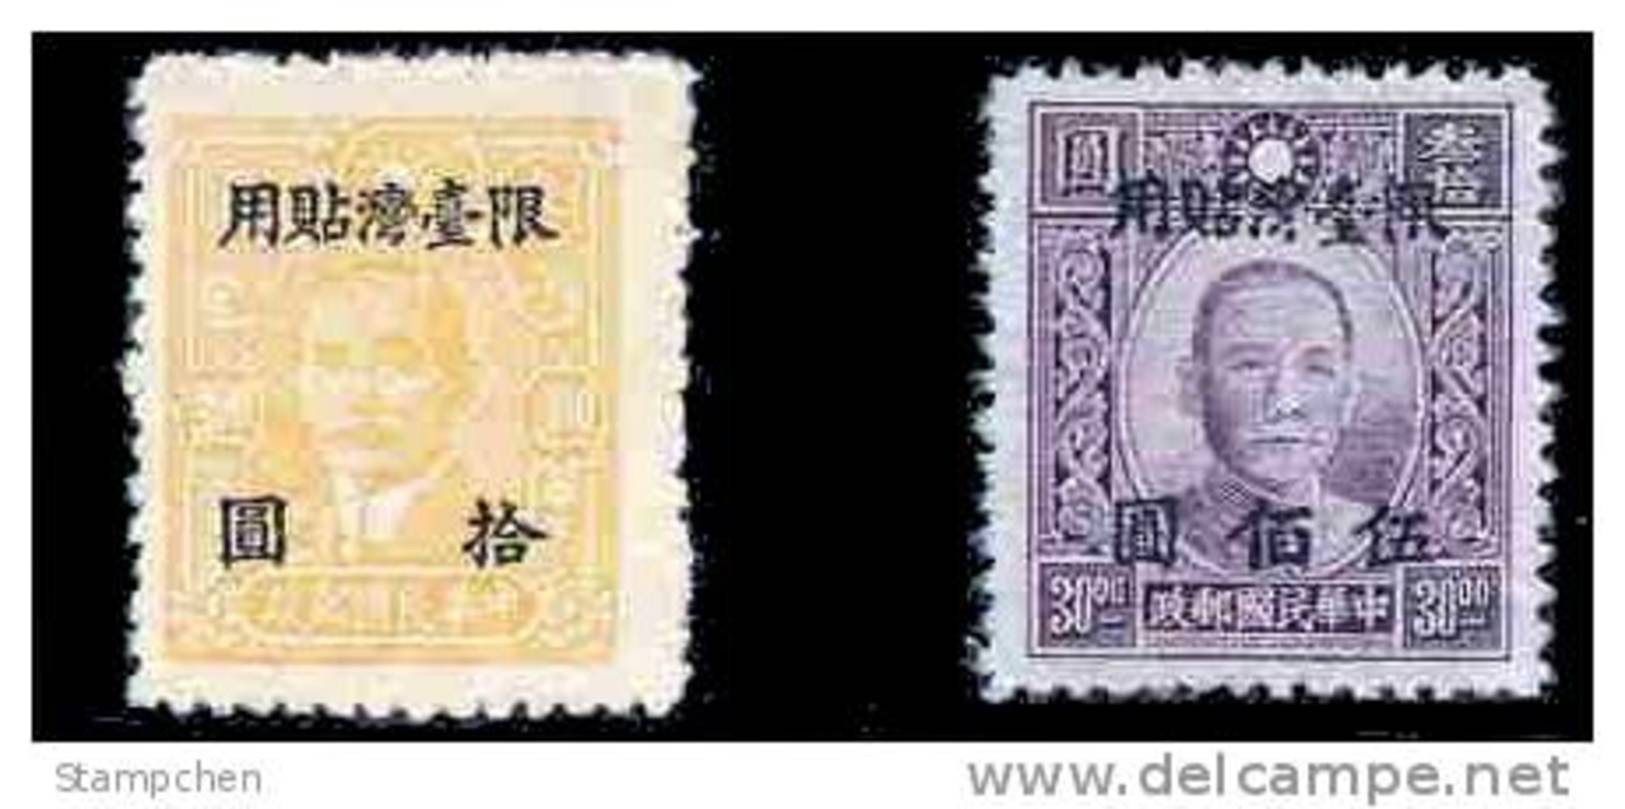 1948 Dr. Sun Yat-sen Portrait Pai Cheng Print, Restricted For Use In Taiwan Stamps SYS DT12 - Ongebruikt